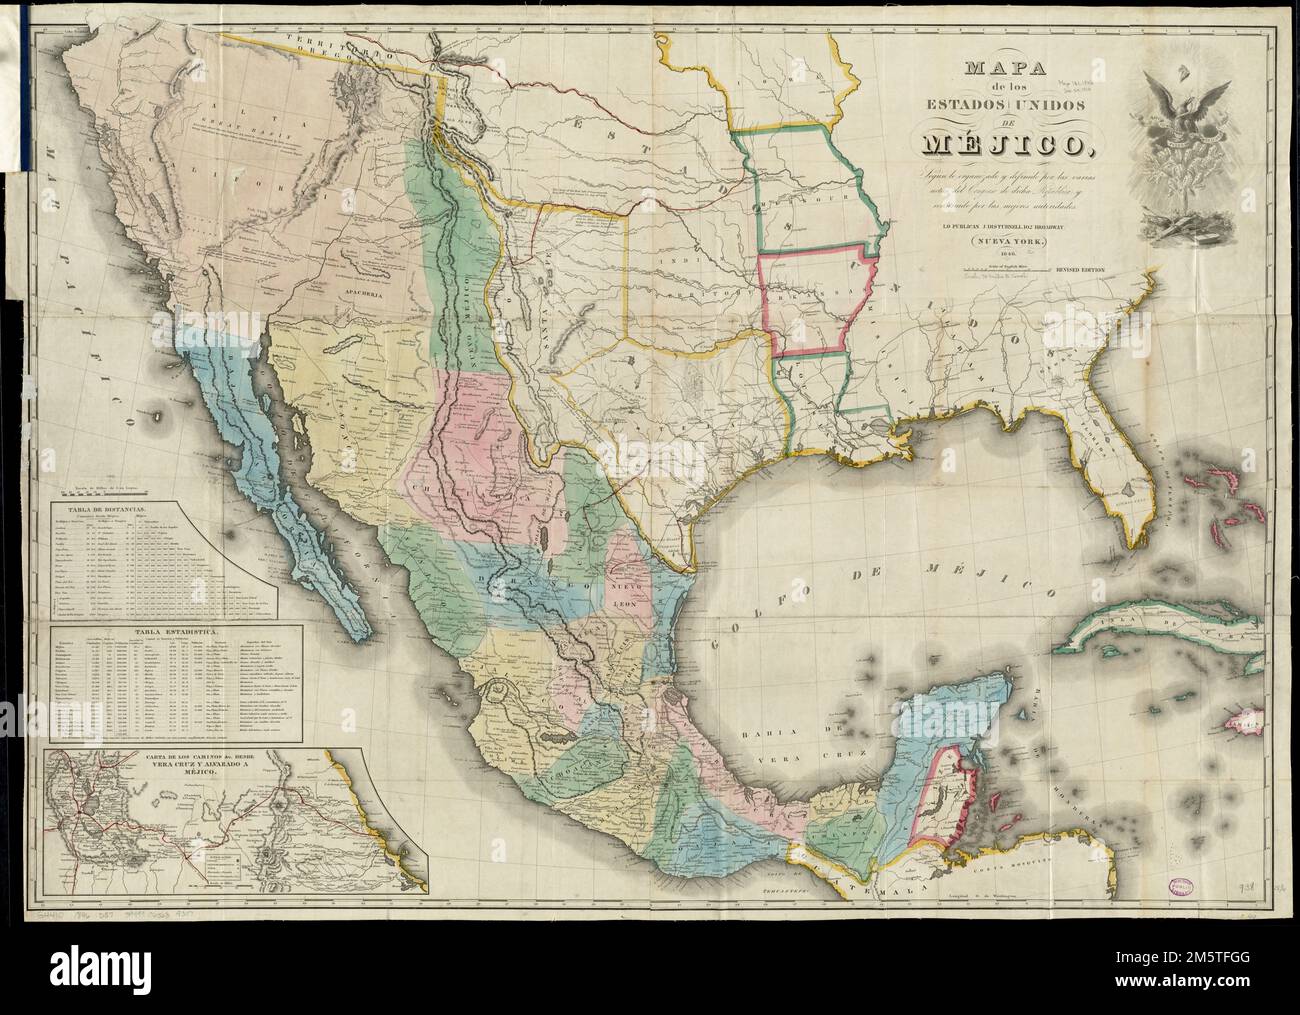 Mapa de los Estados Unidos de Méjico. Relief shown by hachures and spot heights. Differs from other 1846 variants in having all the following details: 'scale of English miles' instead of 'scale of miles,' 'revised edition,' 'Rinconada Pass' near Monterrey, Mexico, and trail between San Antonio and Austin (source: Rittenhouse's Disturnell's treaty map. Stagecoach Press, 1965.). Prime meridian: Washington. Inset: Carta de los caminos &c. desde Vera Cruz y Alvarado a Méjico.' Includes illustration, distance table and statistics table. In Spanish. Some labels in English.. America Transformed: Pu Stock Photo